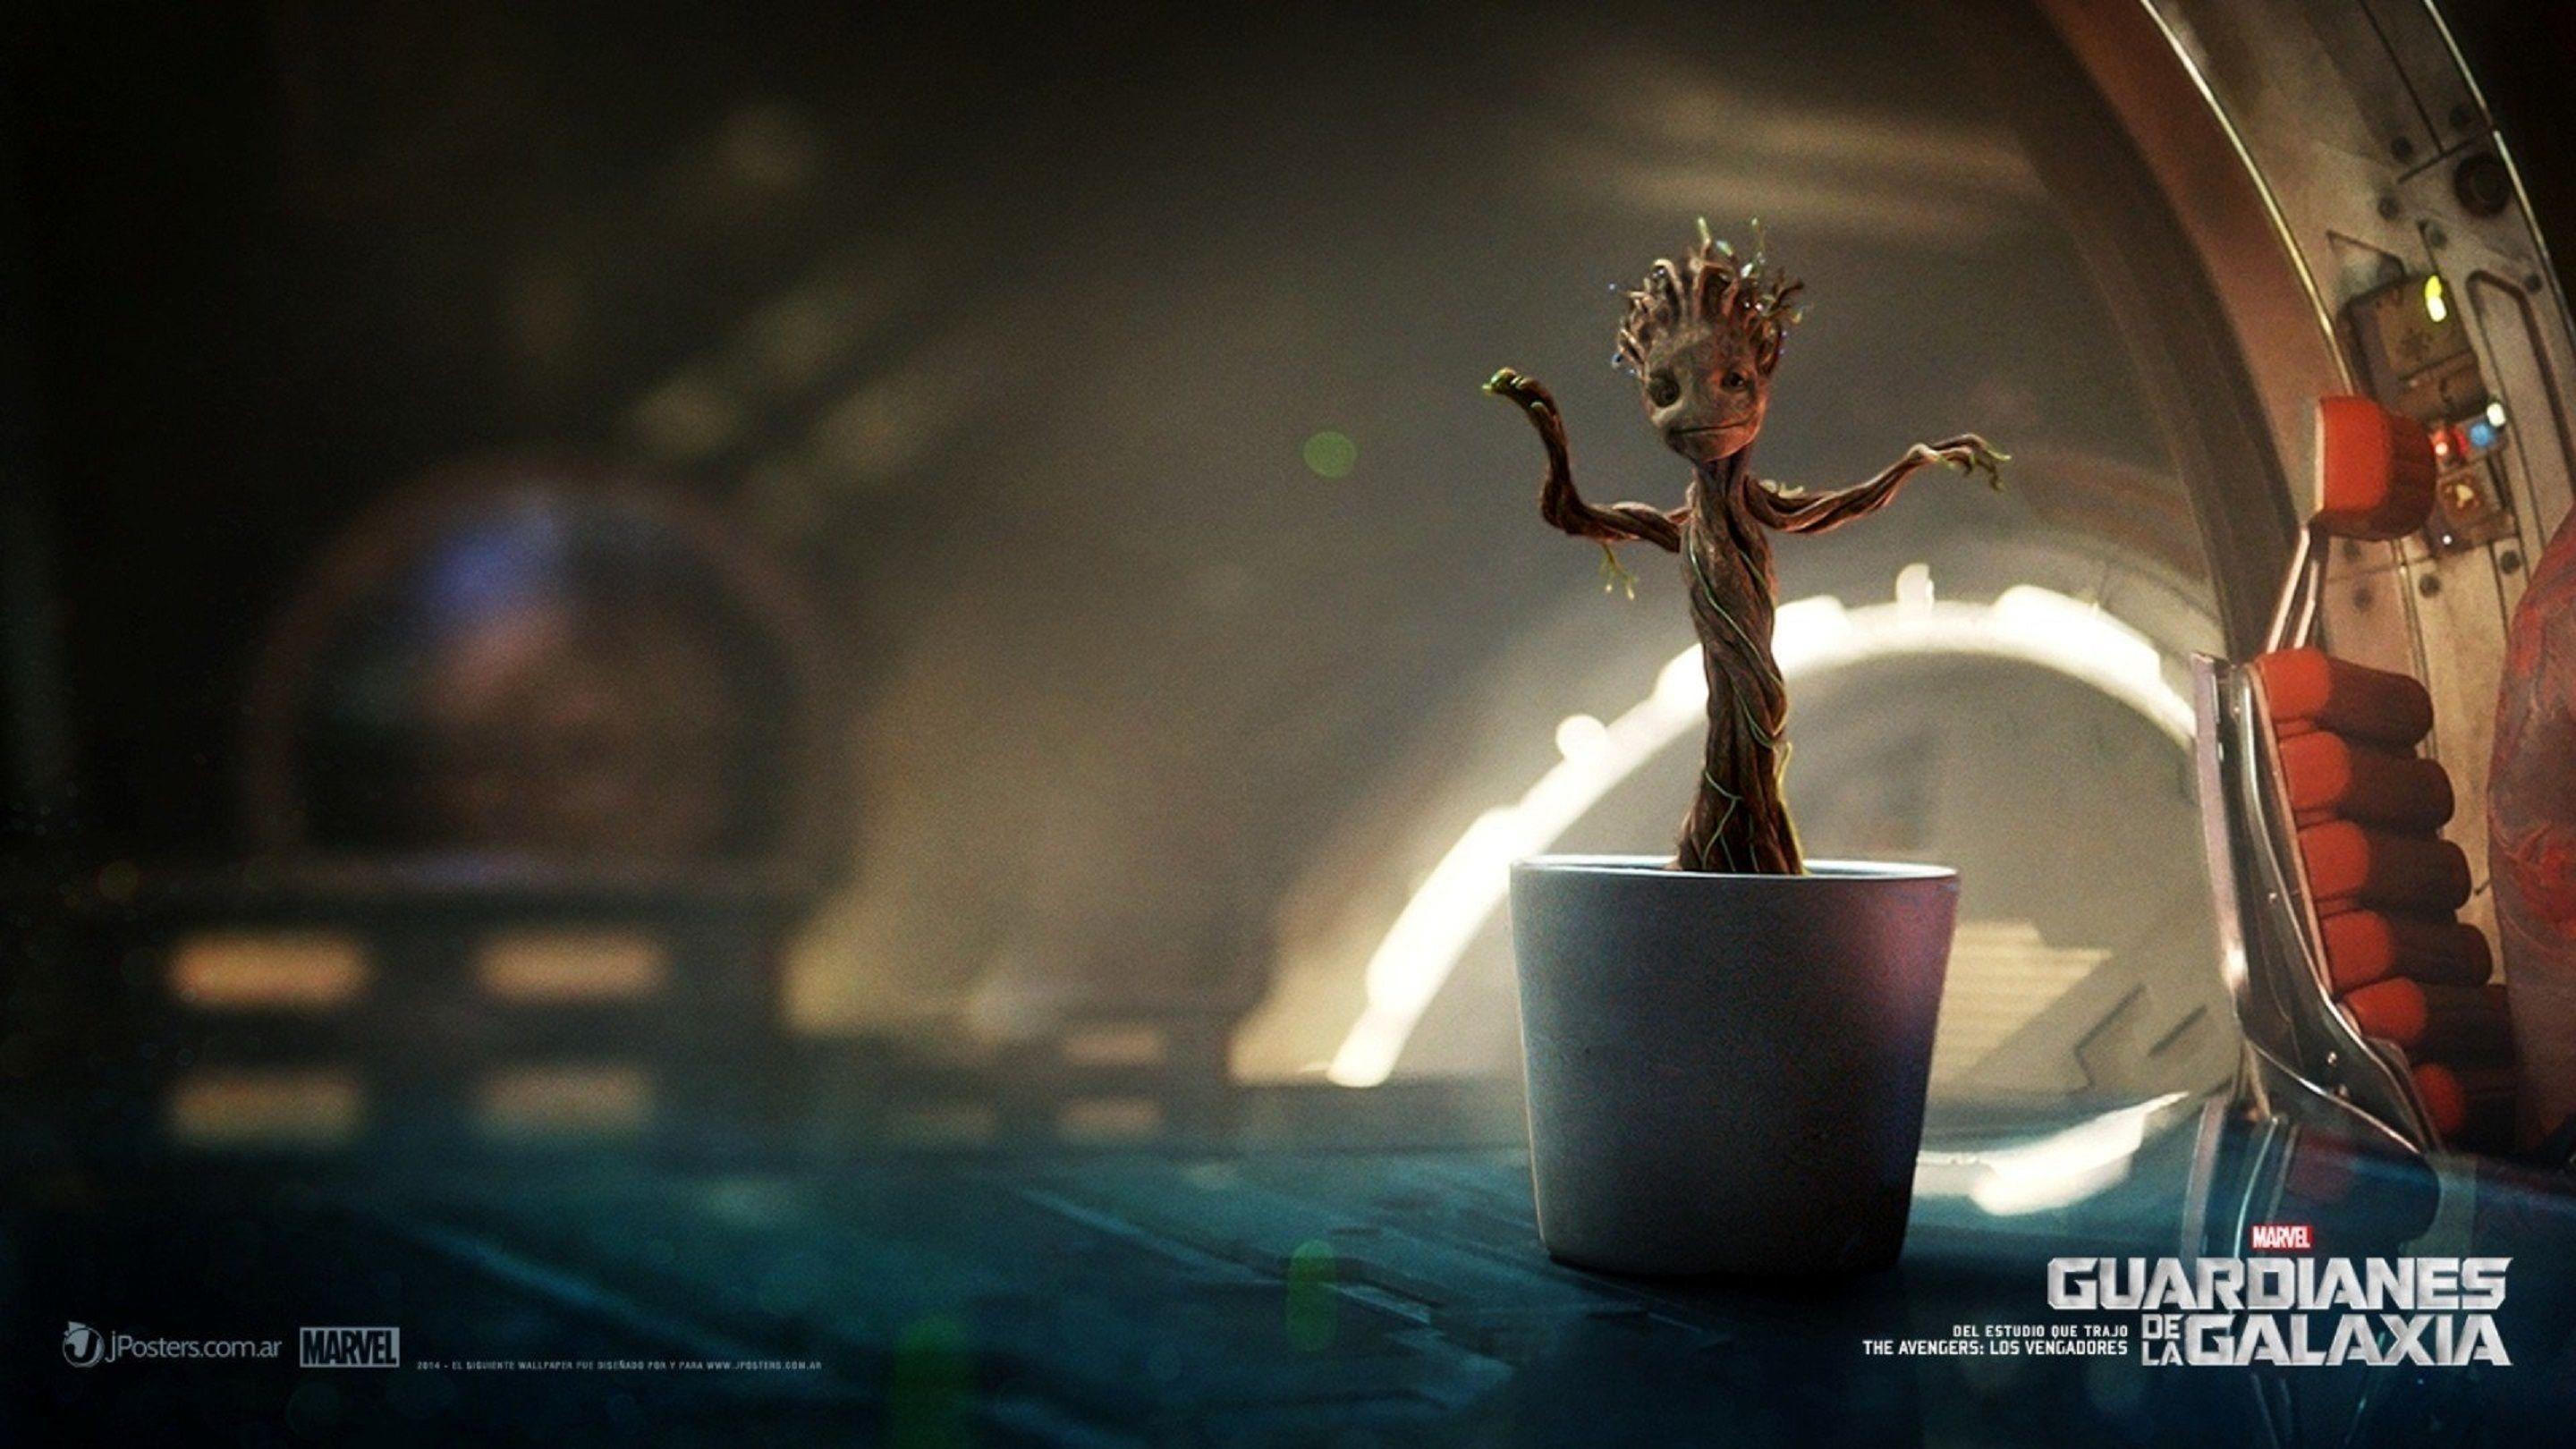 Guardians Of The Galaxy Baby Groot Wallpaper. HD Wallpaper High